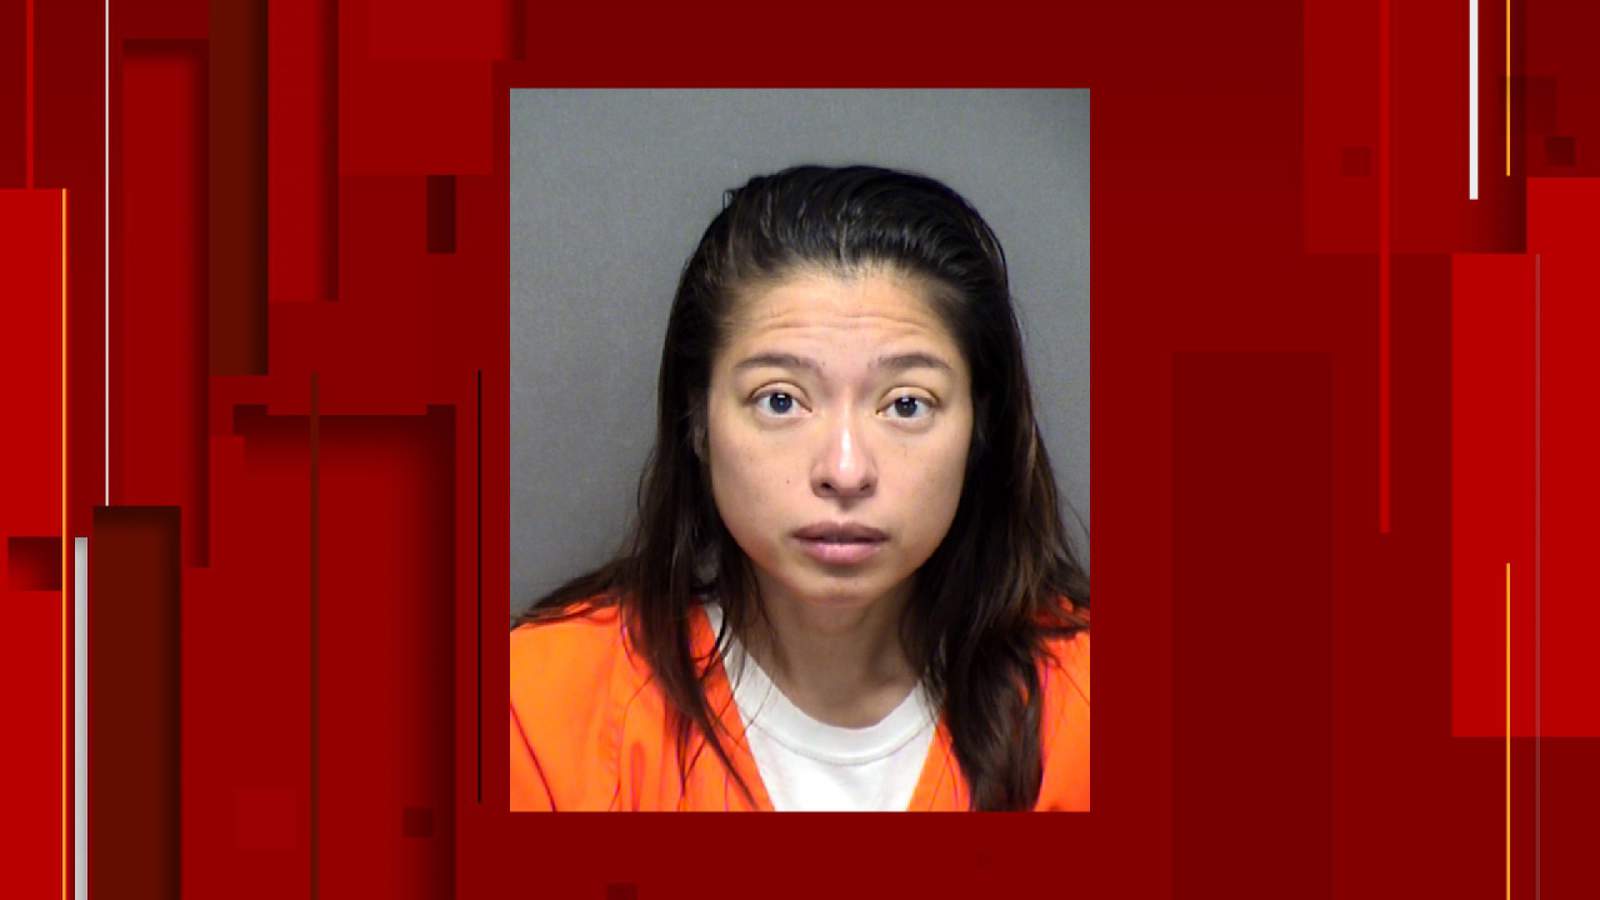 LVPD: Woman charged with intoxication manslaughter after fatally striking man on sidewalk